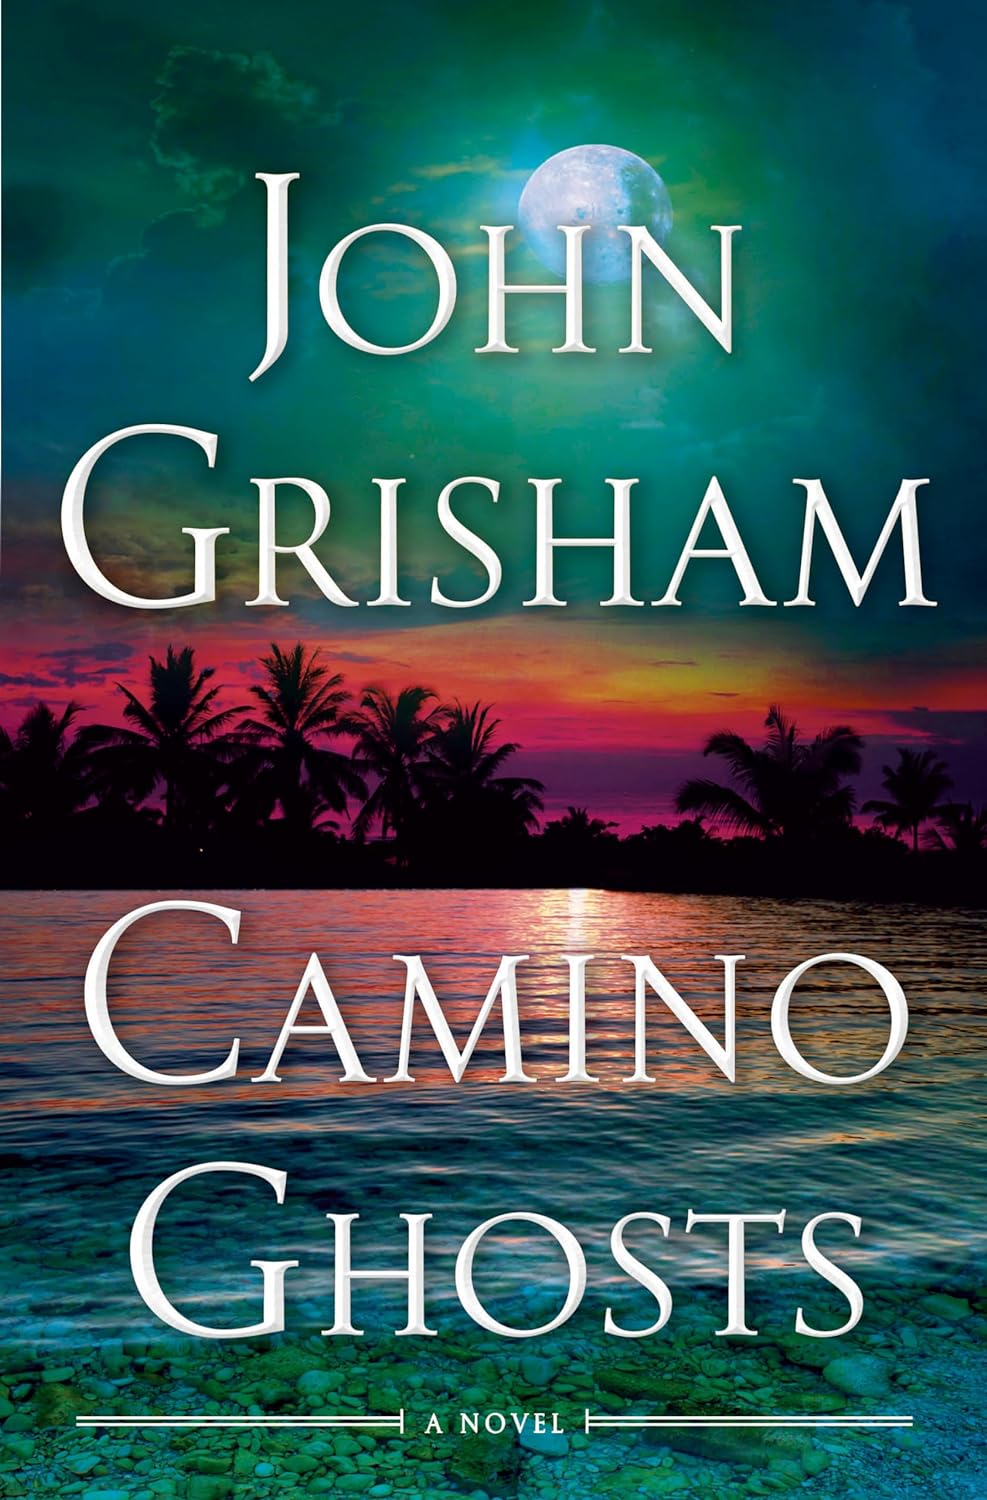 book cover for "Camino Ghosts"